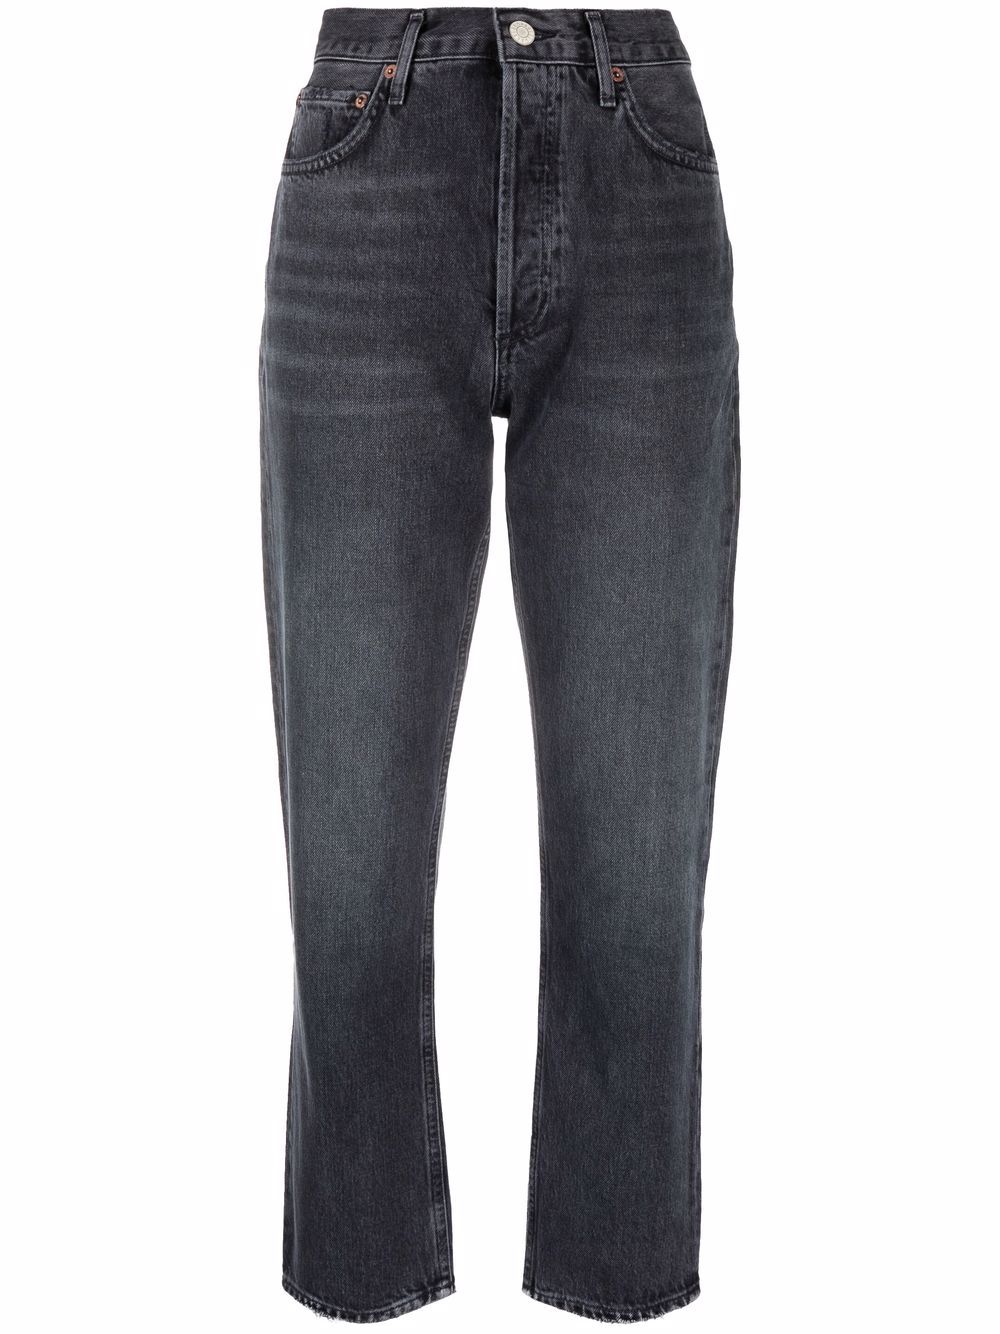 AGOLDE tapered-leg cropped jeans - Black von AGOLDE